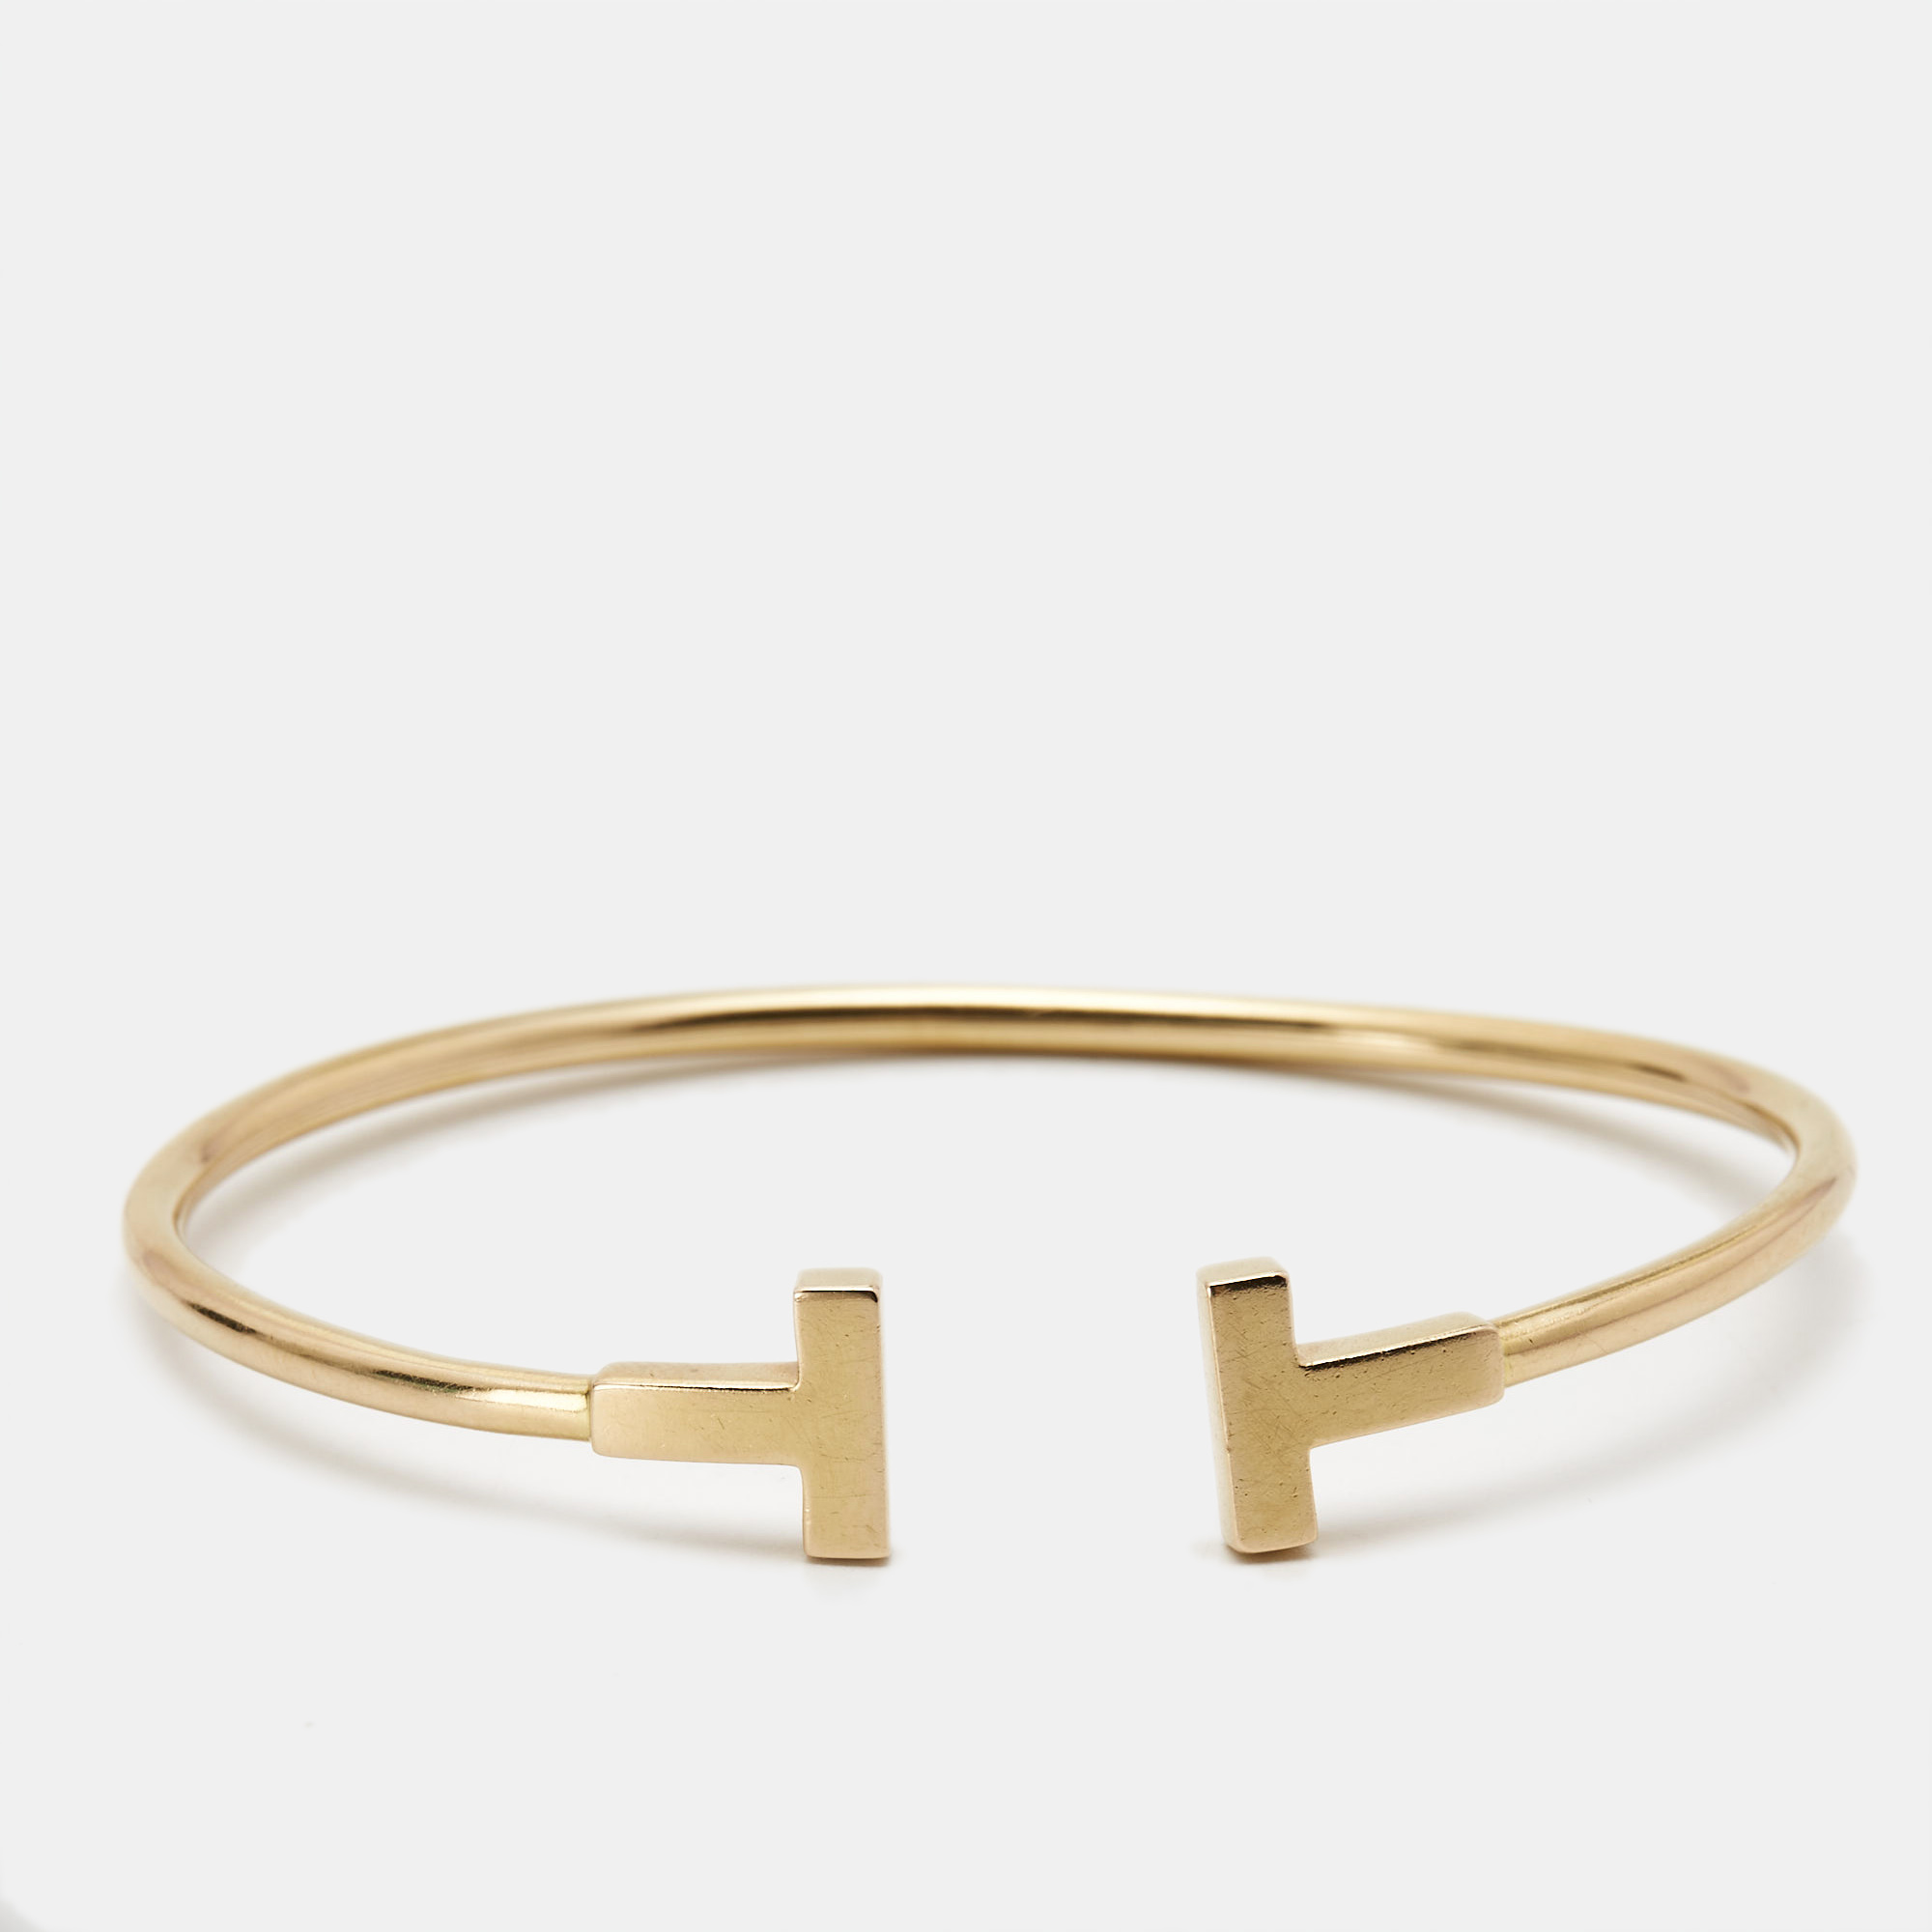 Tiffany and Co. brings this fabulous bracelet rendered in an elegant silhouette for the woman who is ready to ace every accessory game. It is sure to catch an eye and make your heart skip a beat. Flaunt it with your all looks from formal to casual.